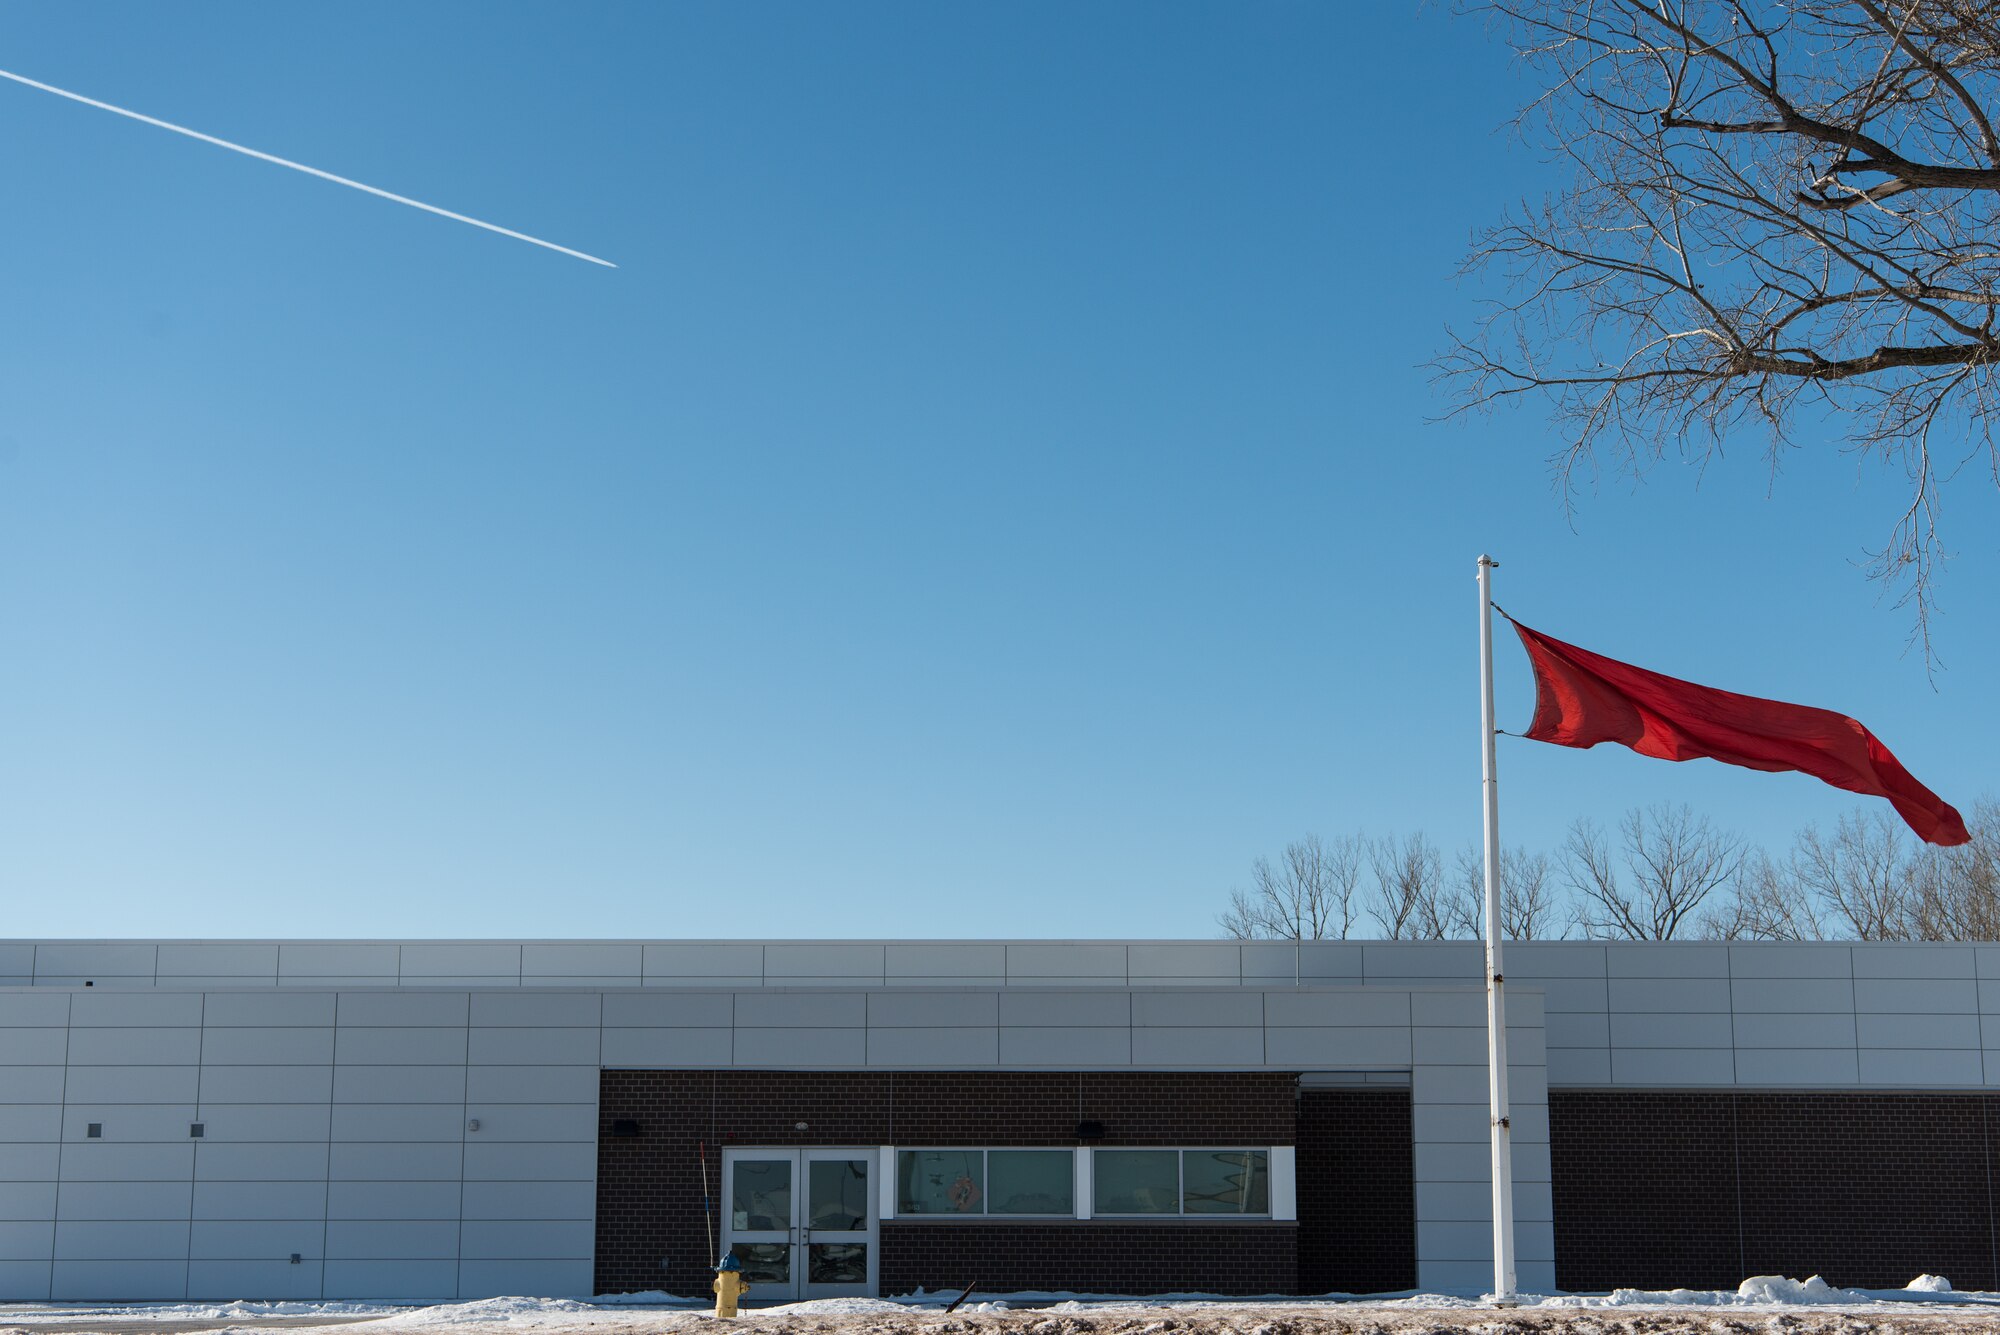 A red flag flies outside the 55th Security Forces Squadron Combat Arm shooting range Feb. 1, 2019, at Offutt Air Force Base, Nebraska. The red flag is raised to signify that the range is active and those in the area should proceed with caution. (U.S. Air Force photo by Senior Airman Jacob Skovo)